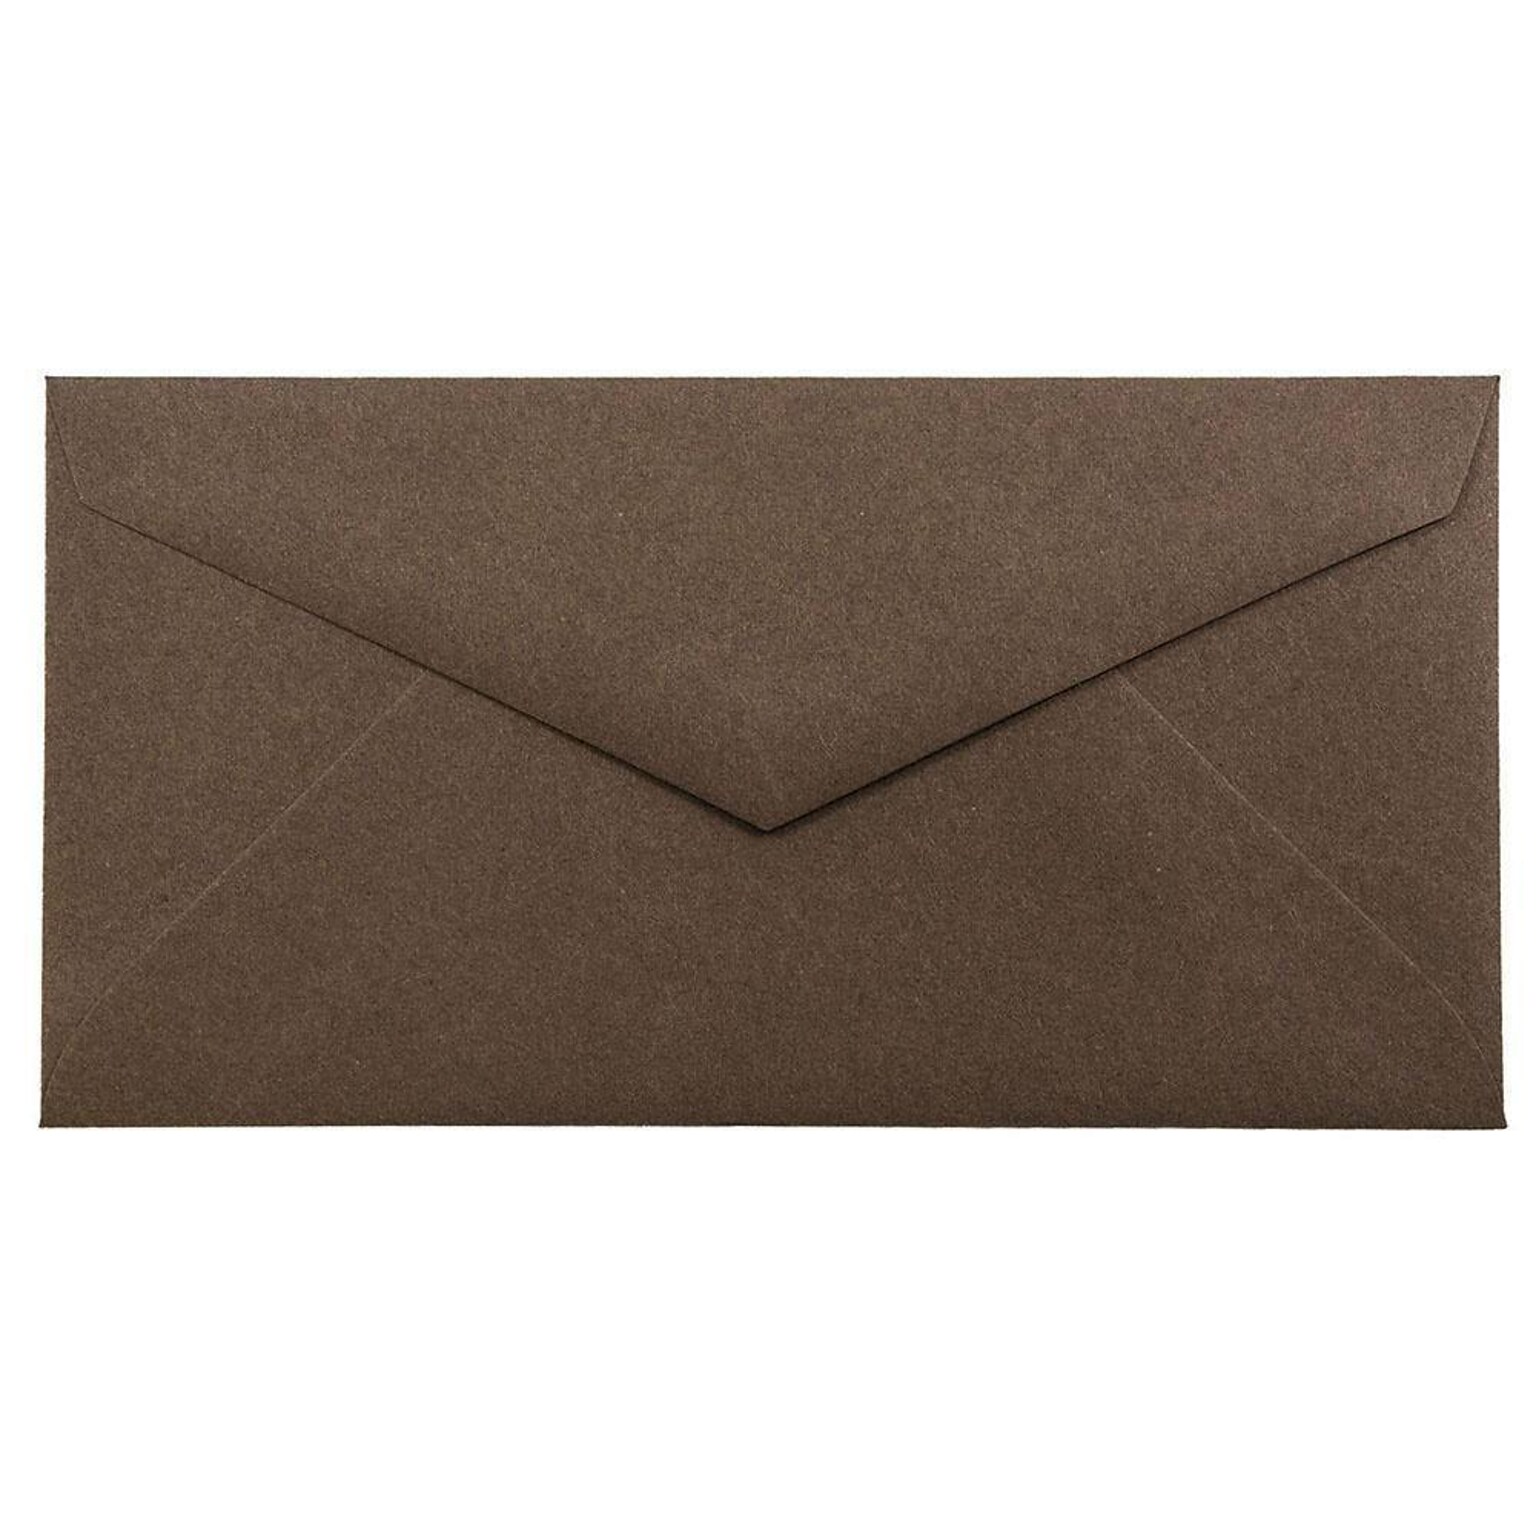 JAM Paper Monarch Open End Invitation Envelope, 3 7/8 x 7 1/2, Chocolate Brown, 50/Pack (34097602I)